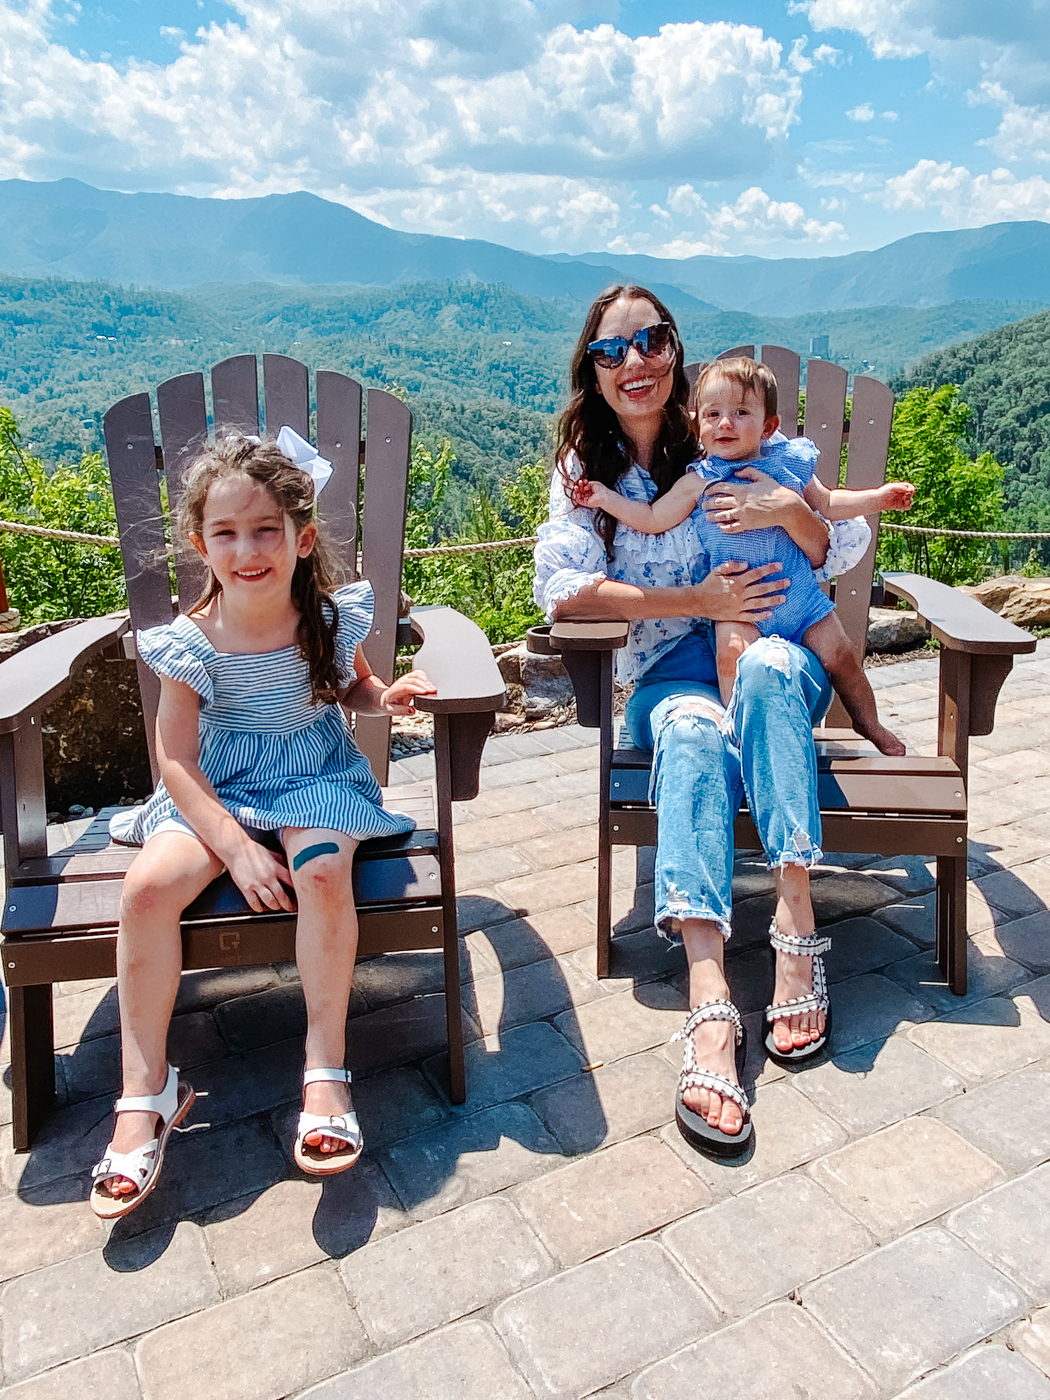 Westgate Smoky Mountain Resort reviewed by top US travel blogger, Lone Star Looking Glass